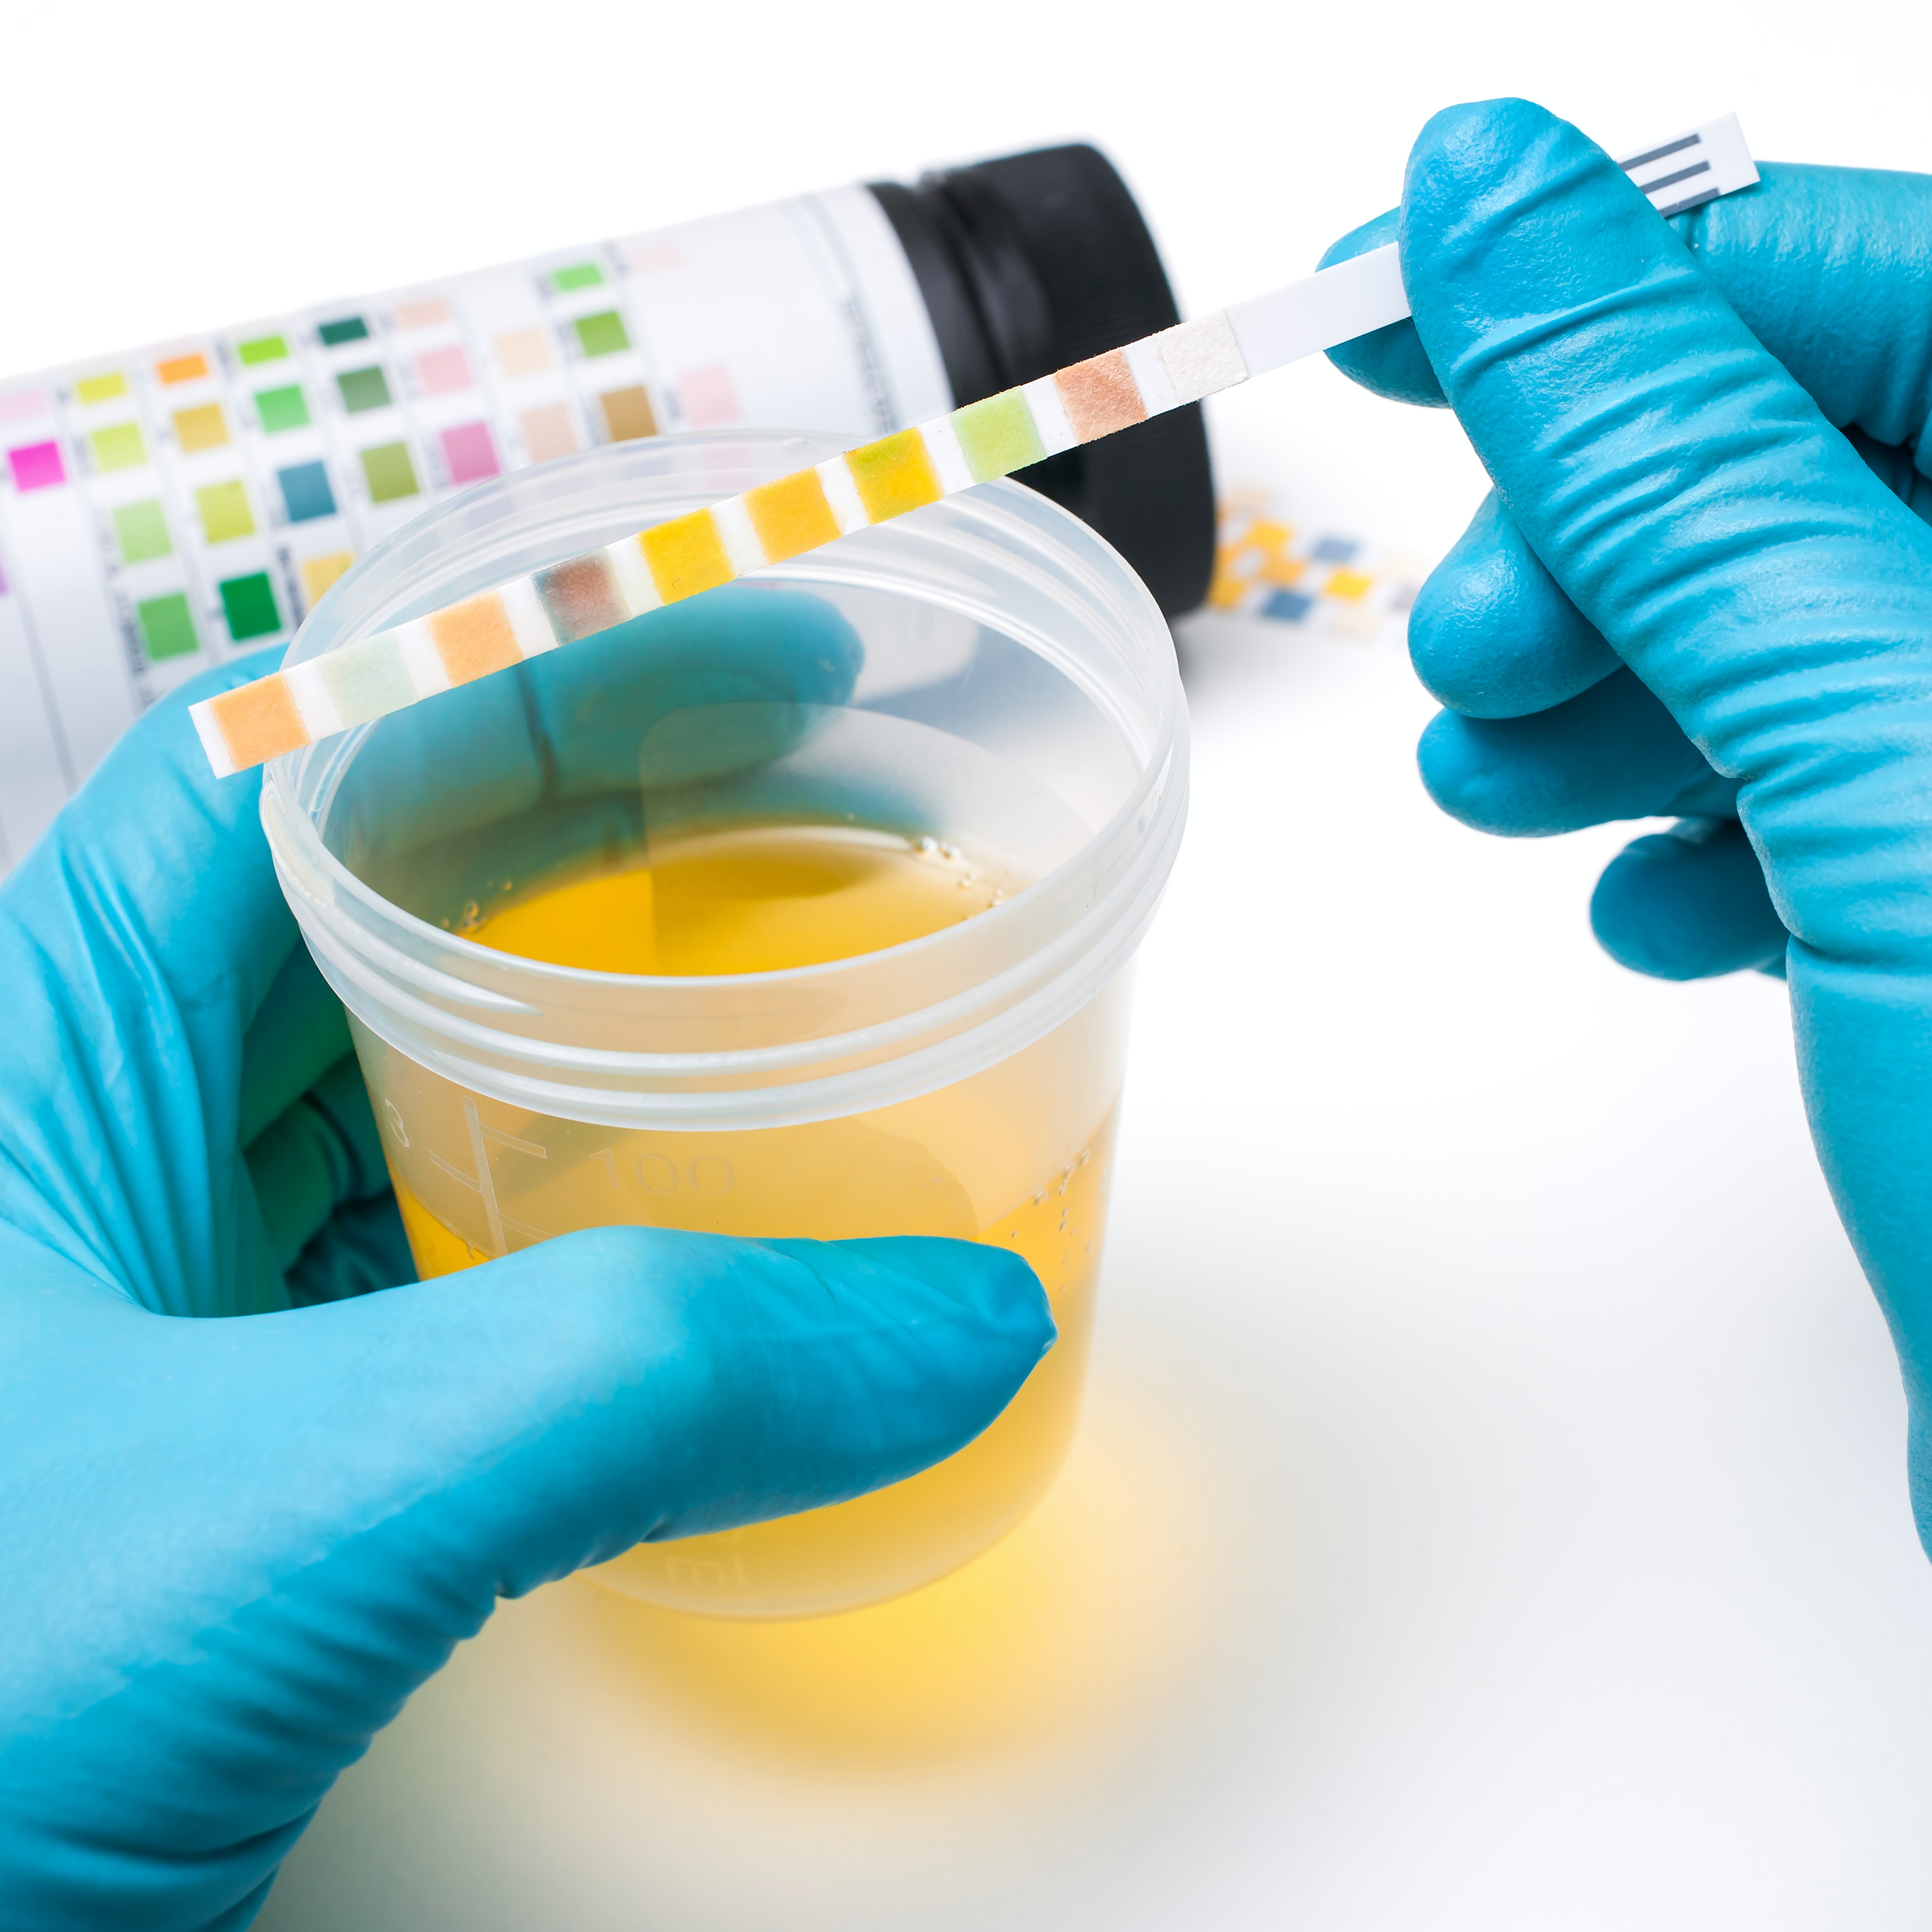 Medical report and urine test strips